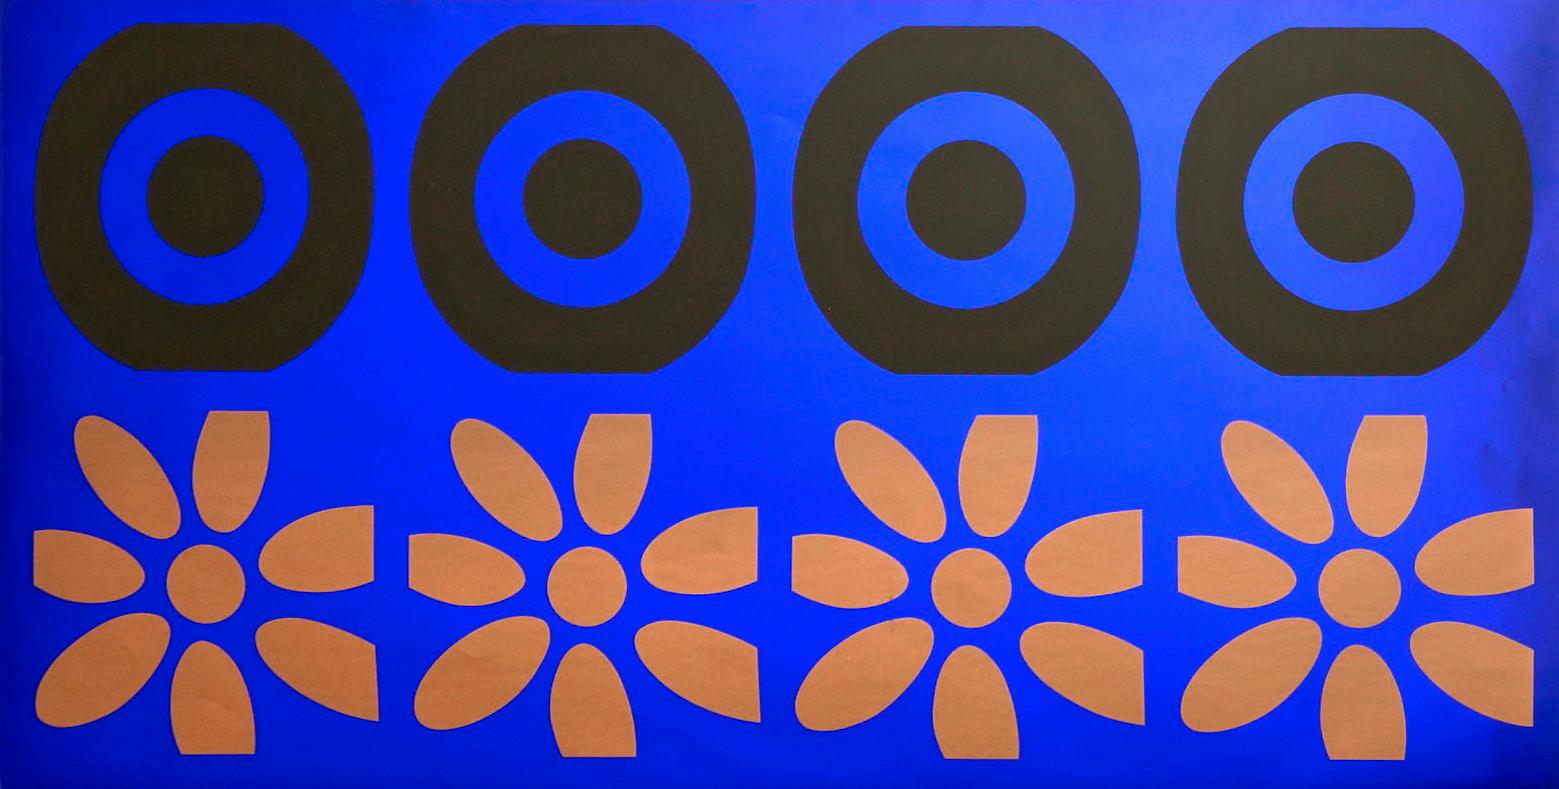 Fabulous large silk screen on foil target panel by listed British Artist Peter Gee circa 1960's which is a one of a kind color combination. The panel can be hung both vertical and horizontal. This piece was from the private collection of Gene Baro,